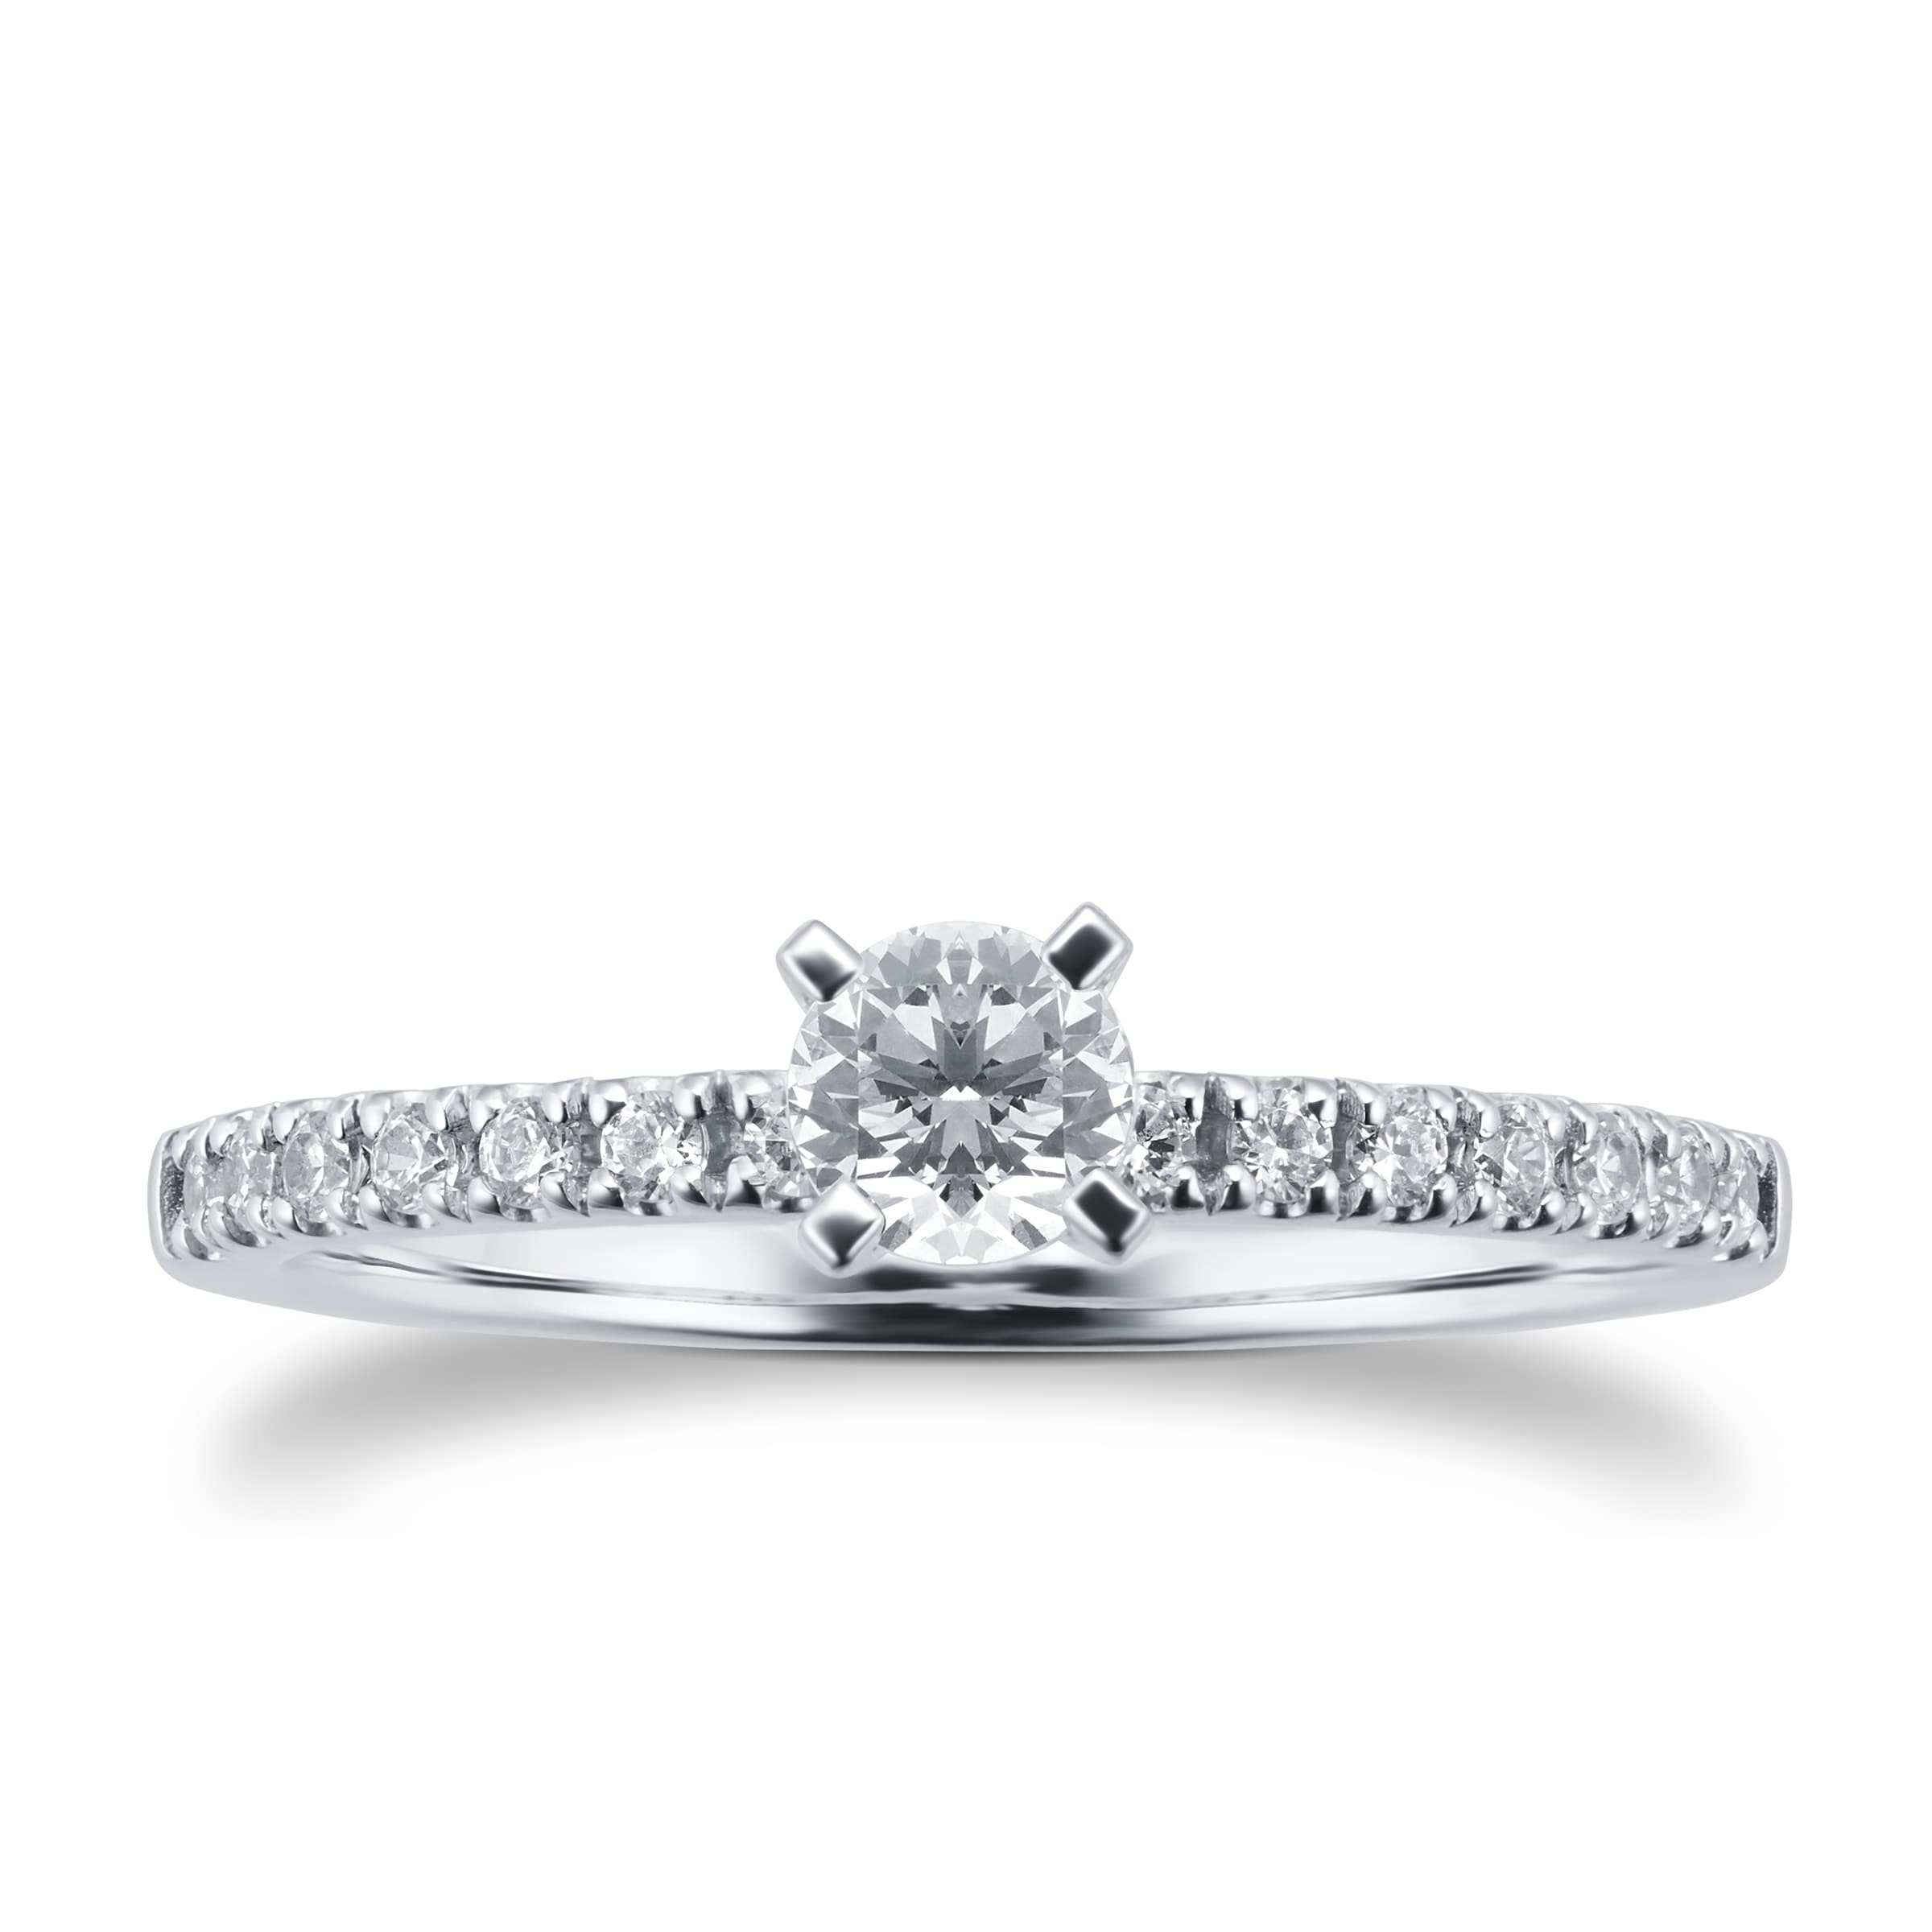 18ct White Gold 0.50cttw Diamond Solitaire Ring